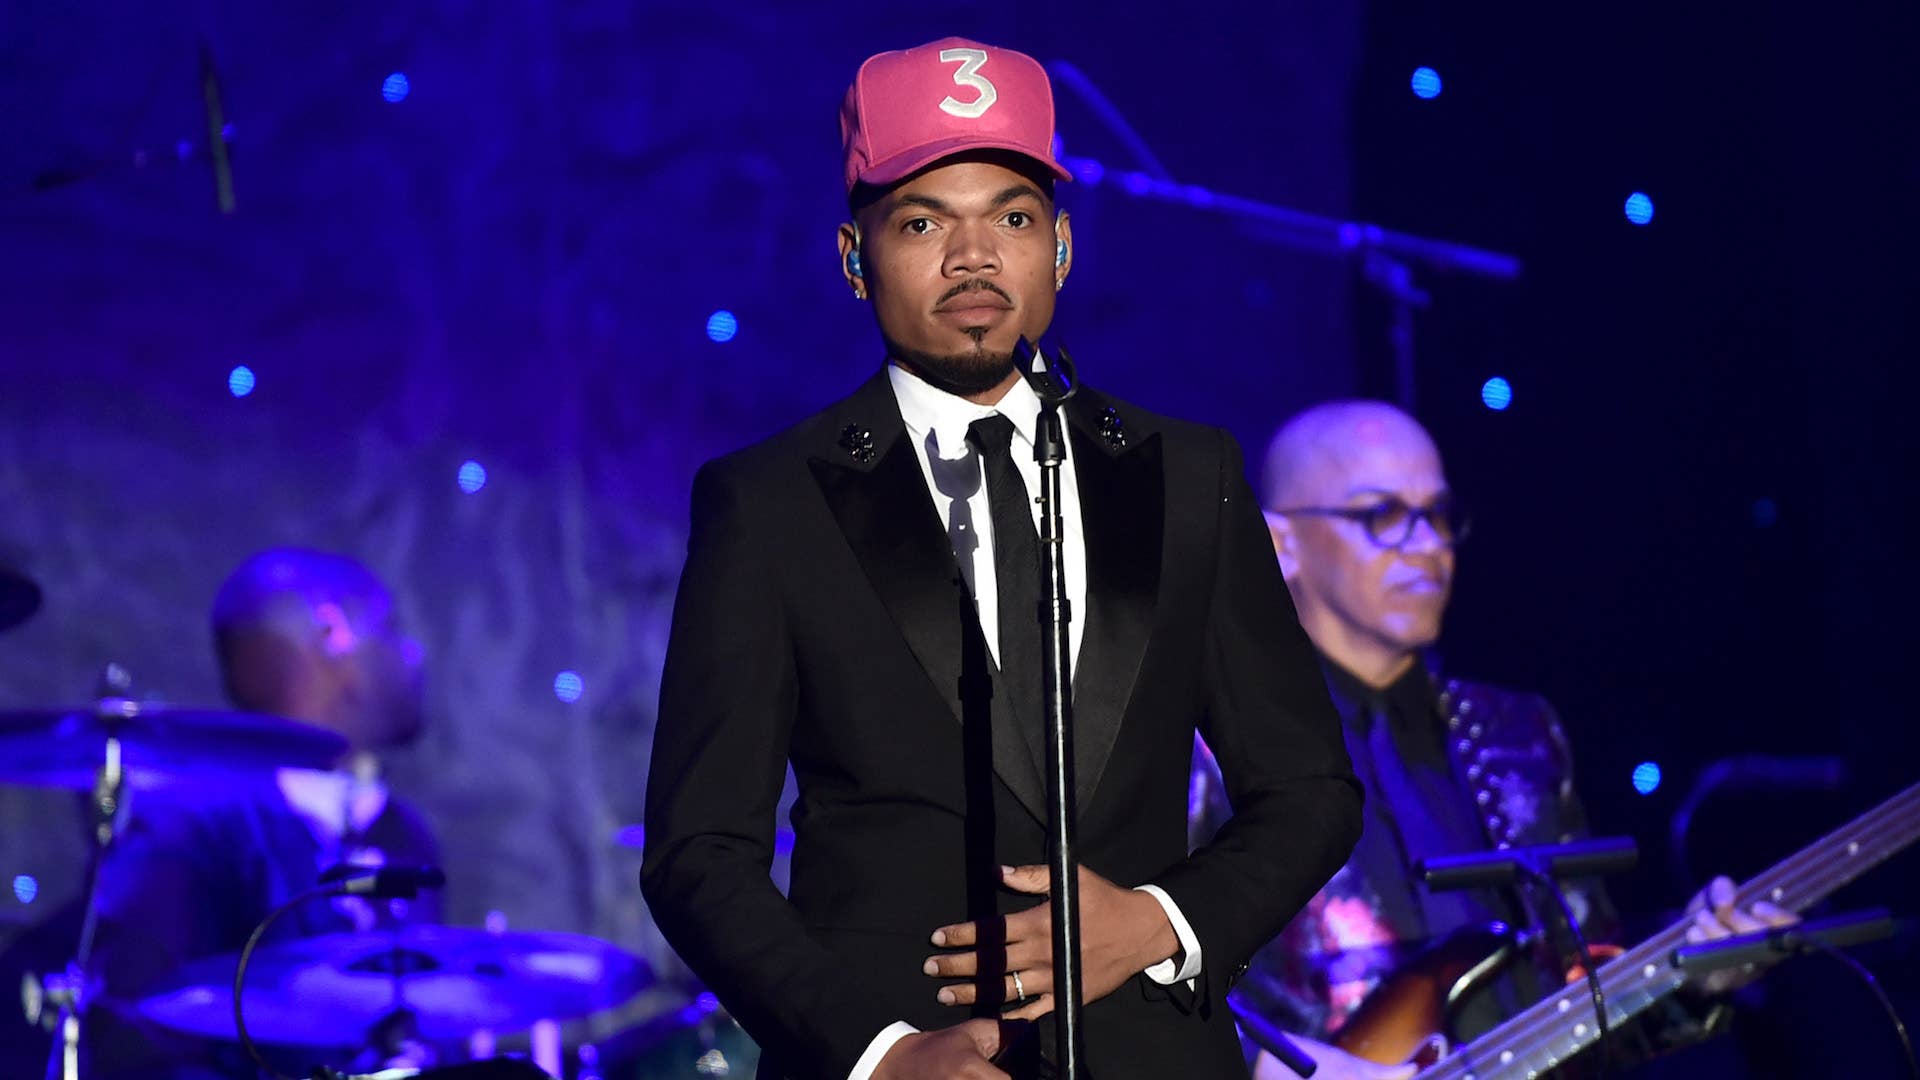 Chance the Rapper performs during the Pre GRAMMY Gala and GRAMMY event.